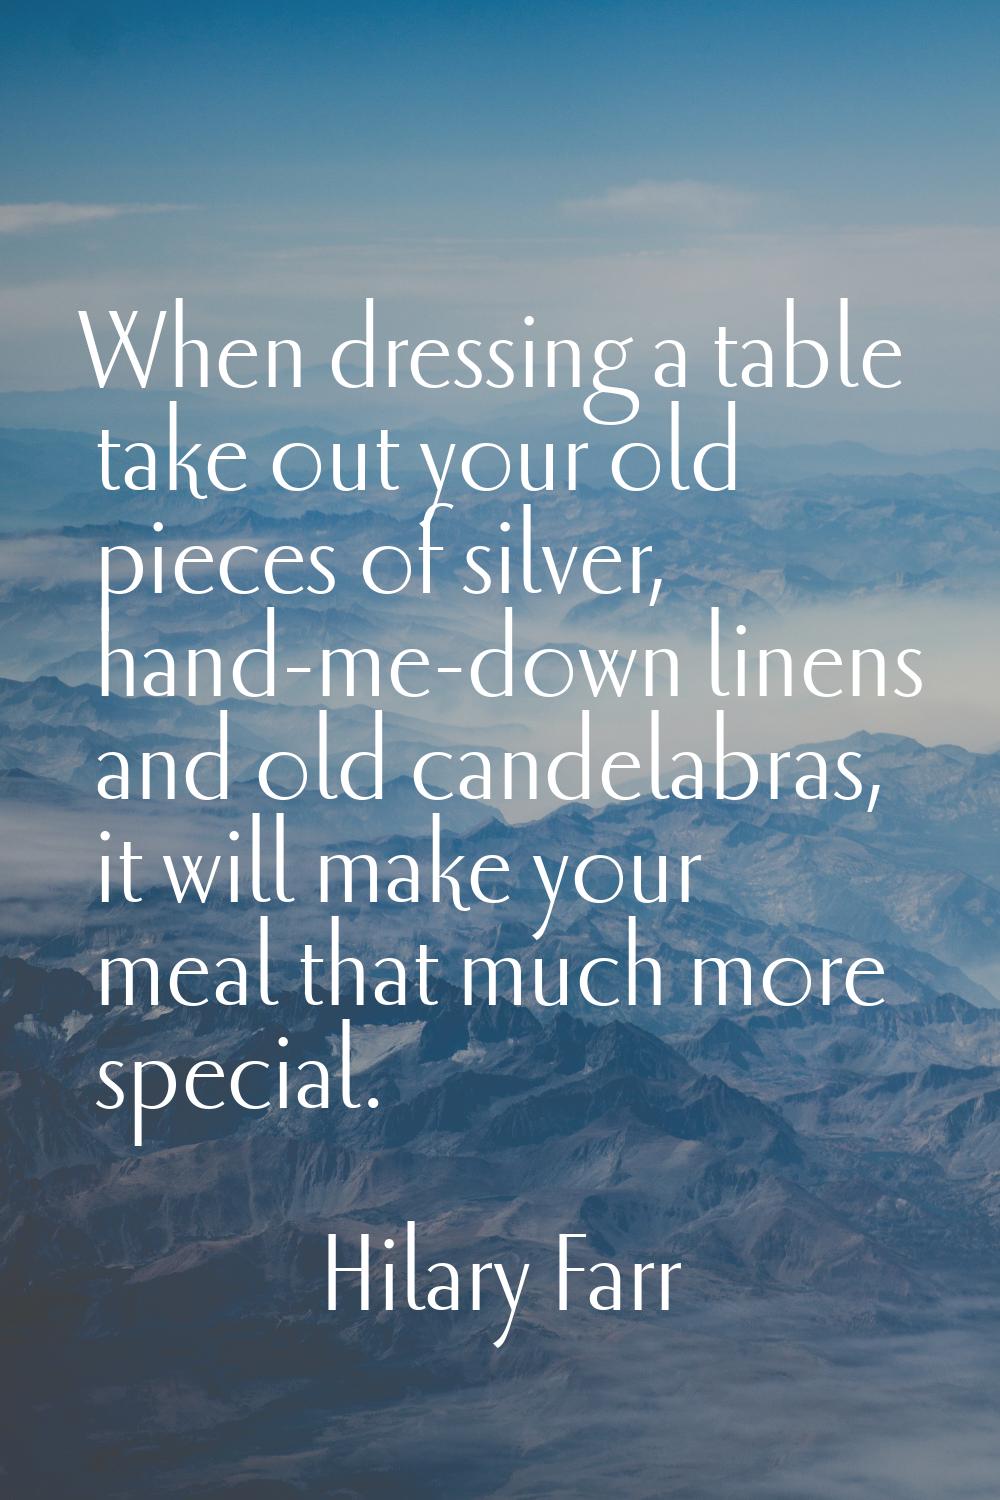 When dressing a table take out your old pieces of silver, hand-me-down linens and old candelabras, 